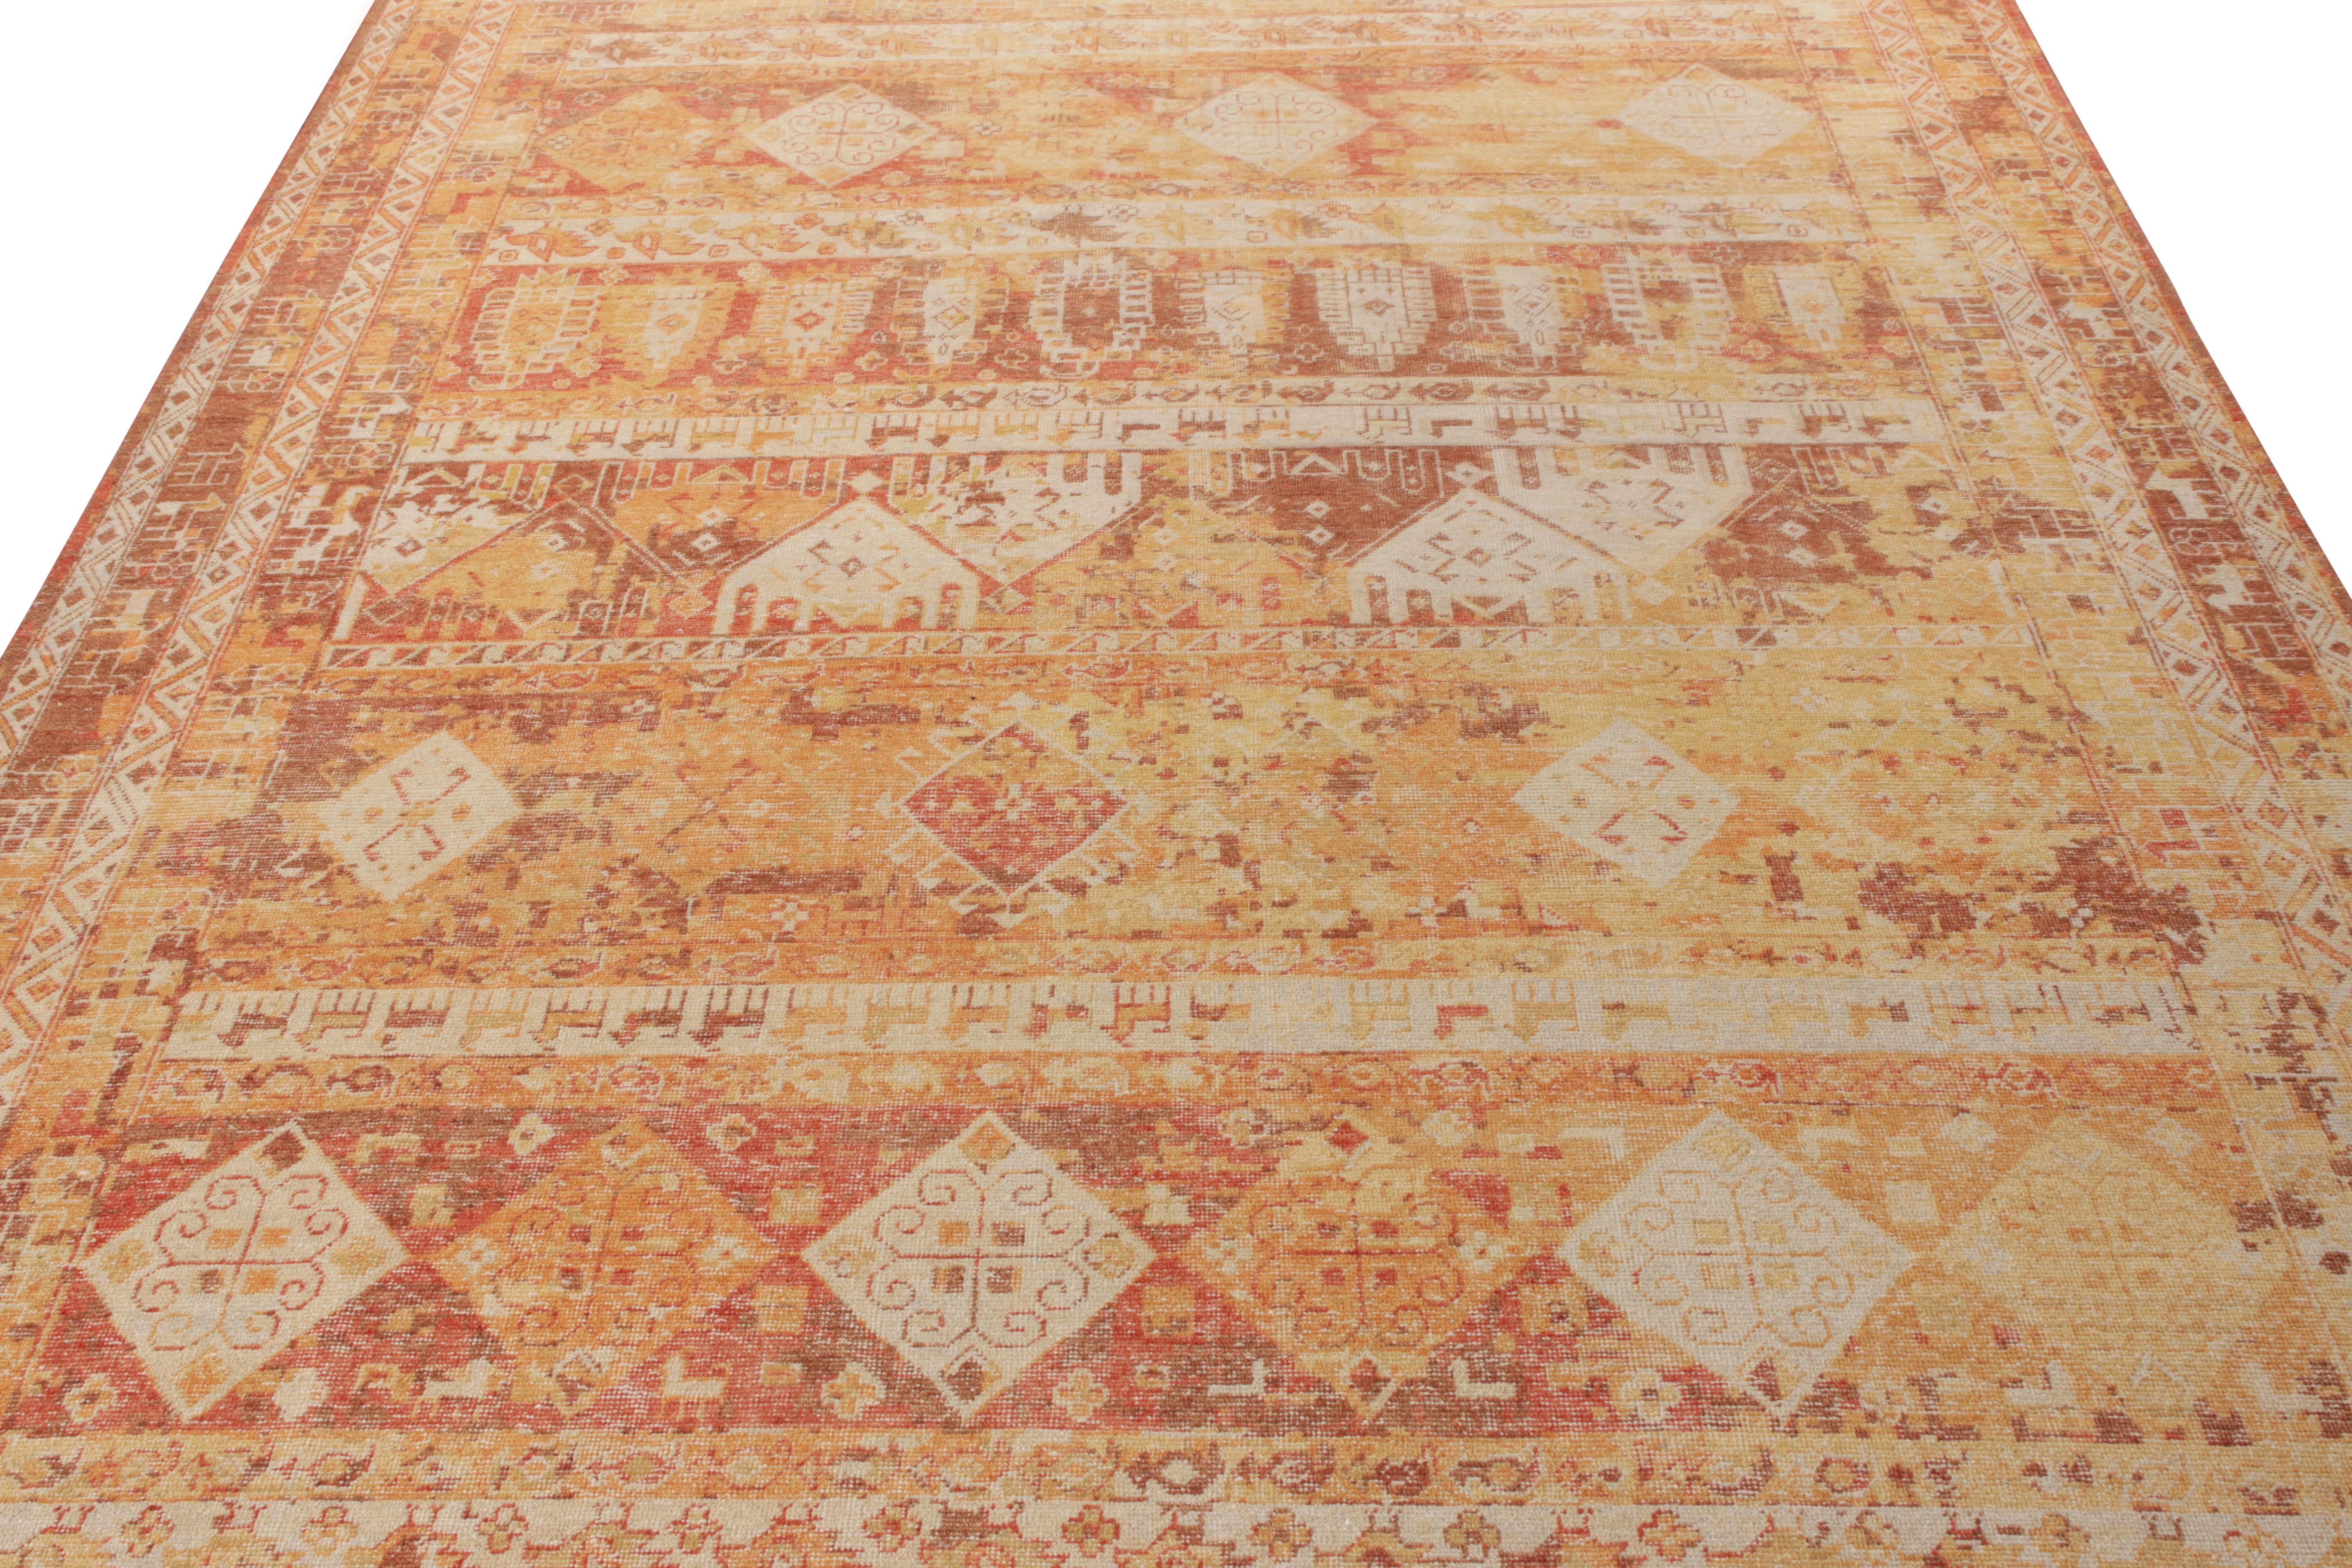 Hand knotted in wool, Rug & Kilim presents this 10x14 size exemplifying distressed brilliance from its Homage Collection. The rug features an intricate geometric pattern which revels in delicious tones of orange, red and beige-brown that play